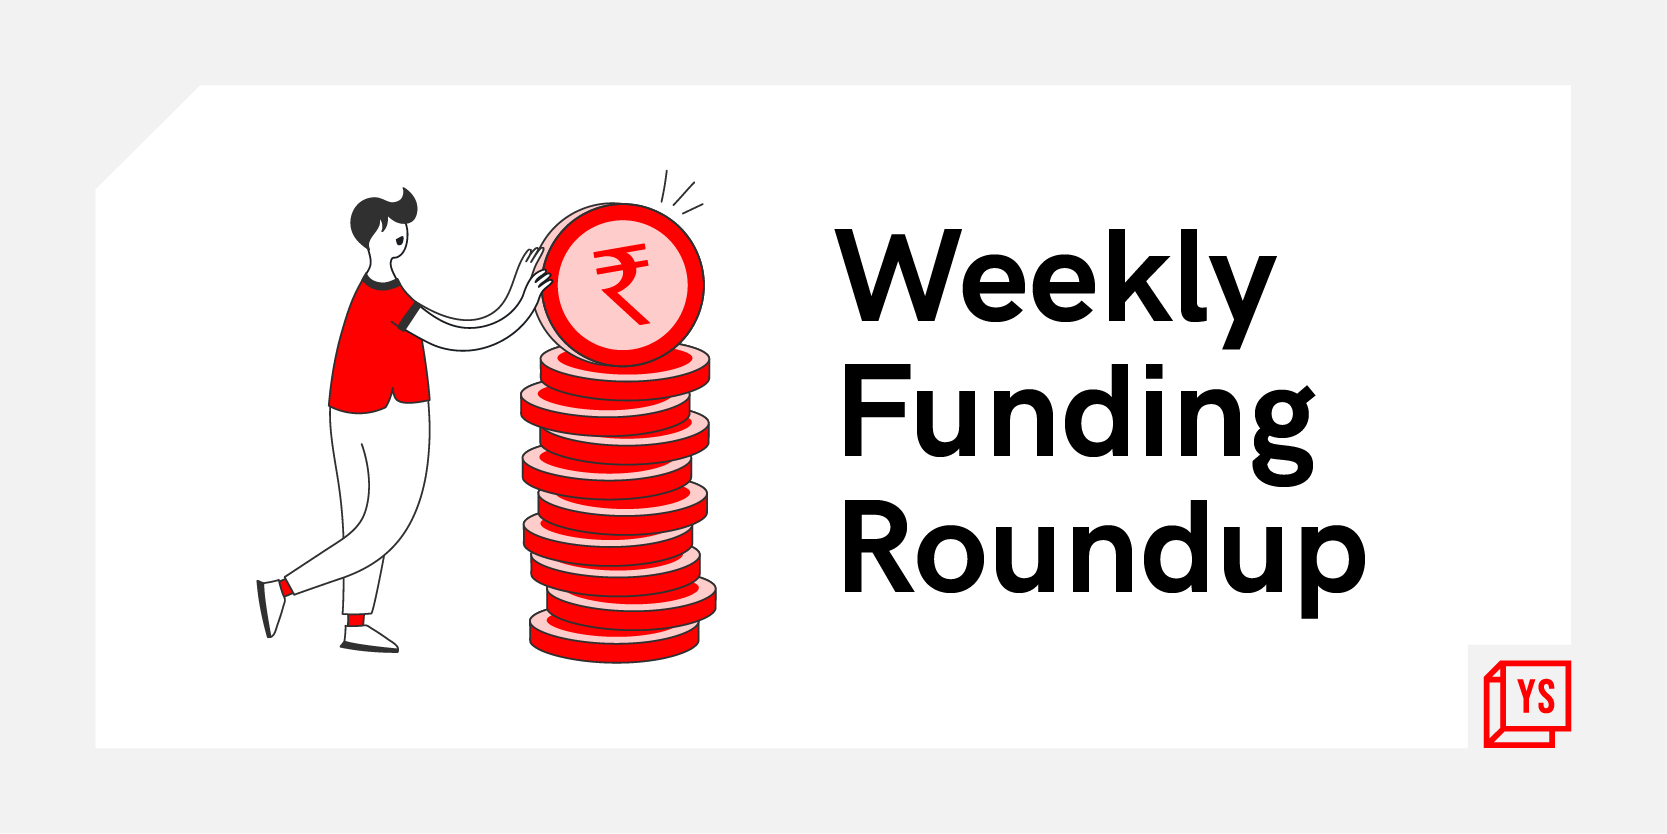 [Weekly Funding Roundup] Venture investments dip among Indian startups due to absence of large deals